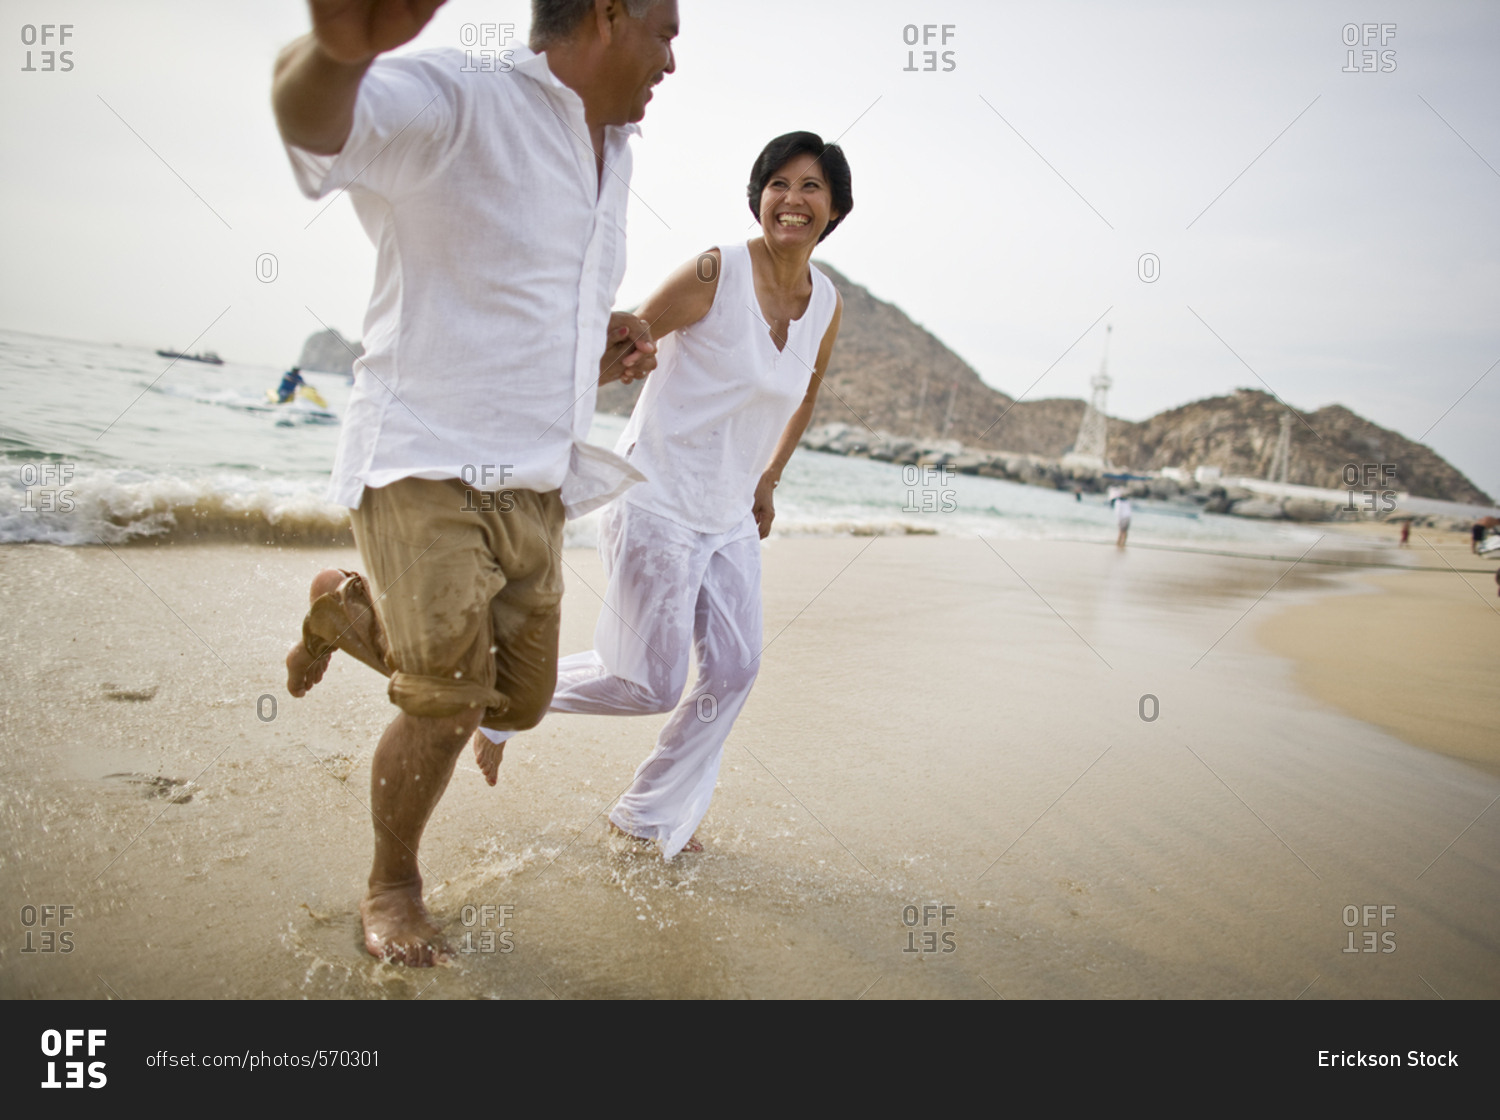 Middle-aged couple running while holding hands on a beach